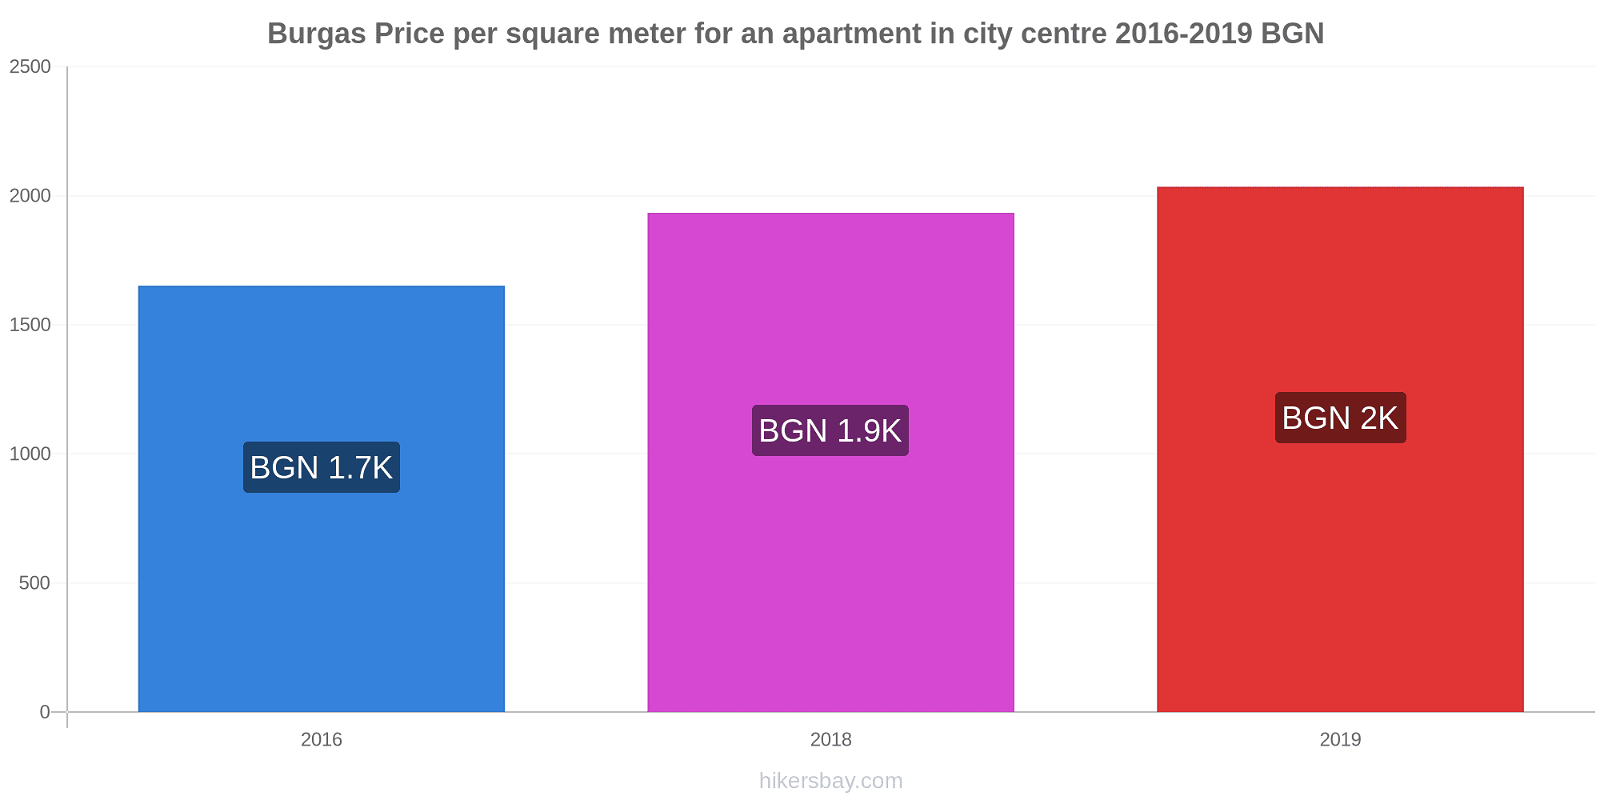 Burgas price changes Price per square meter for an apartment in city centre hikersbay.com